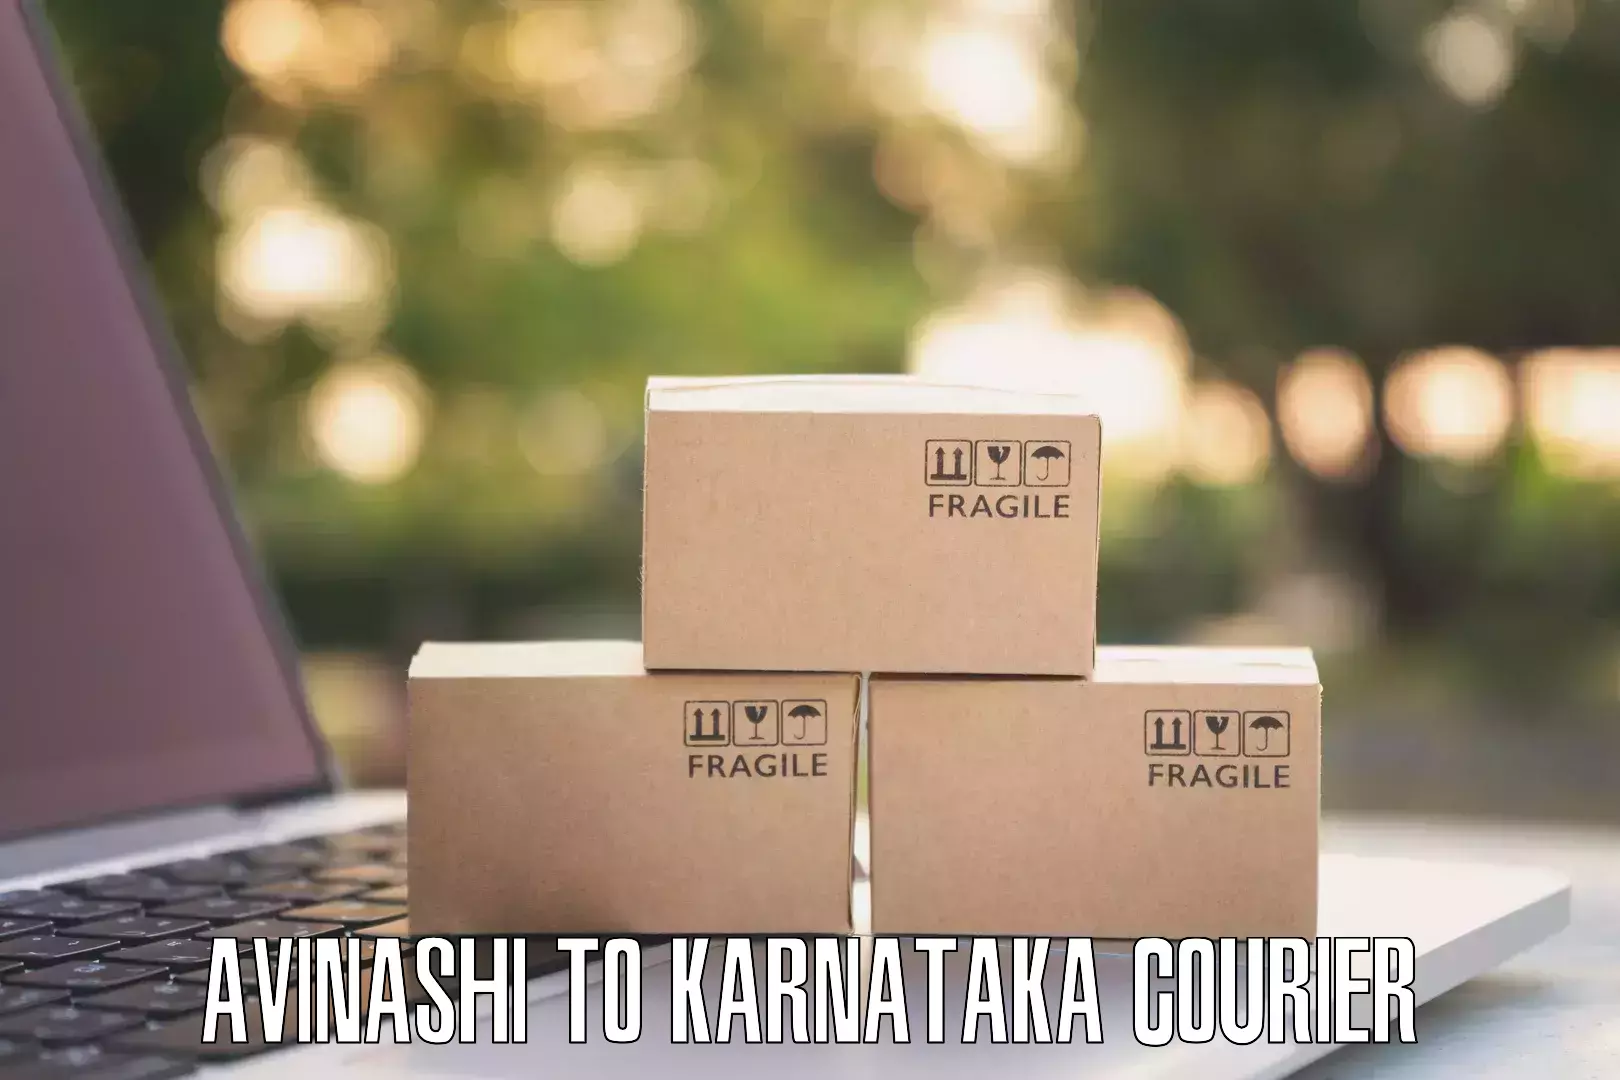 Reliable courier service Avinashi to Manipal